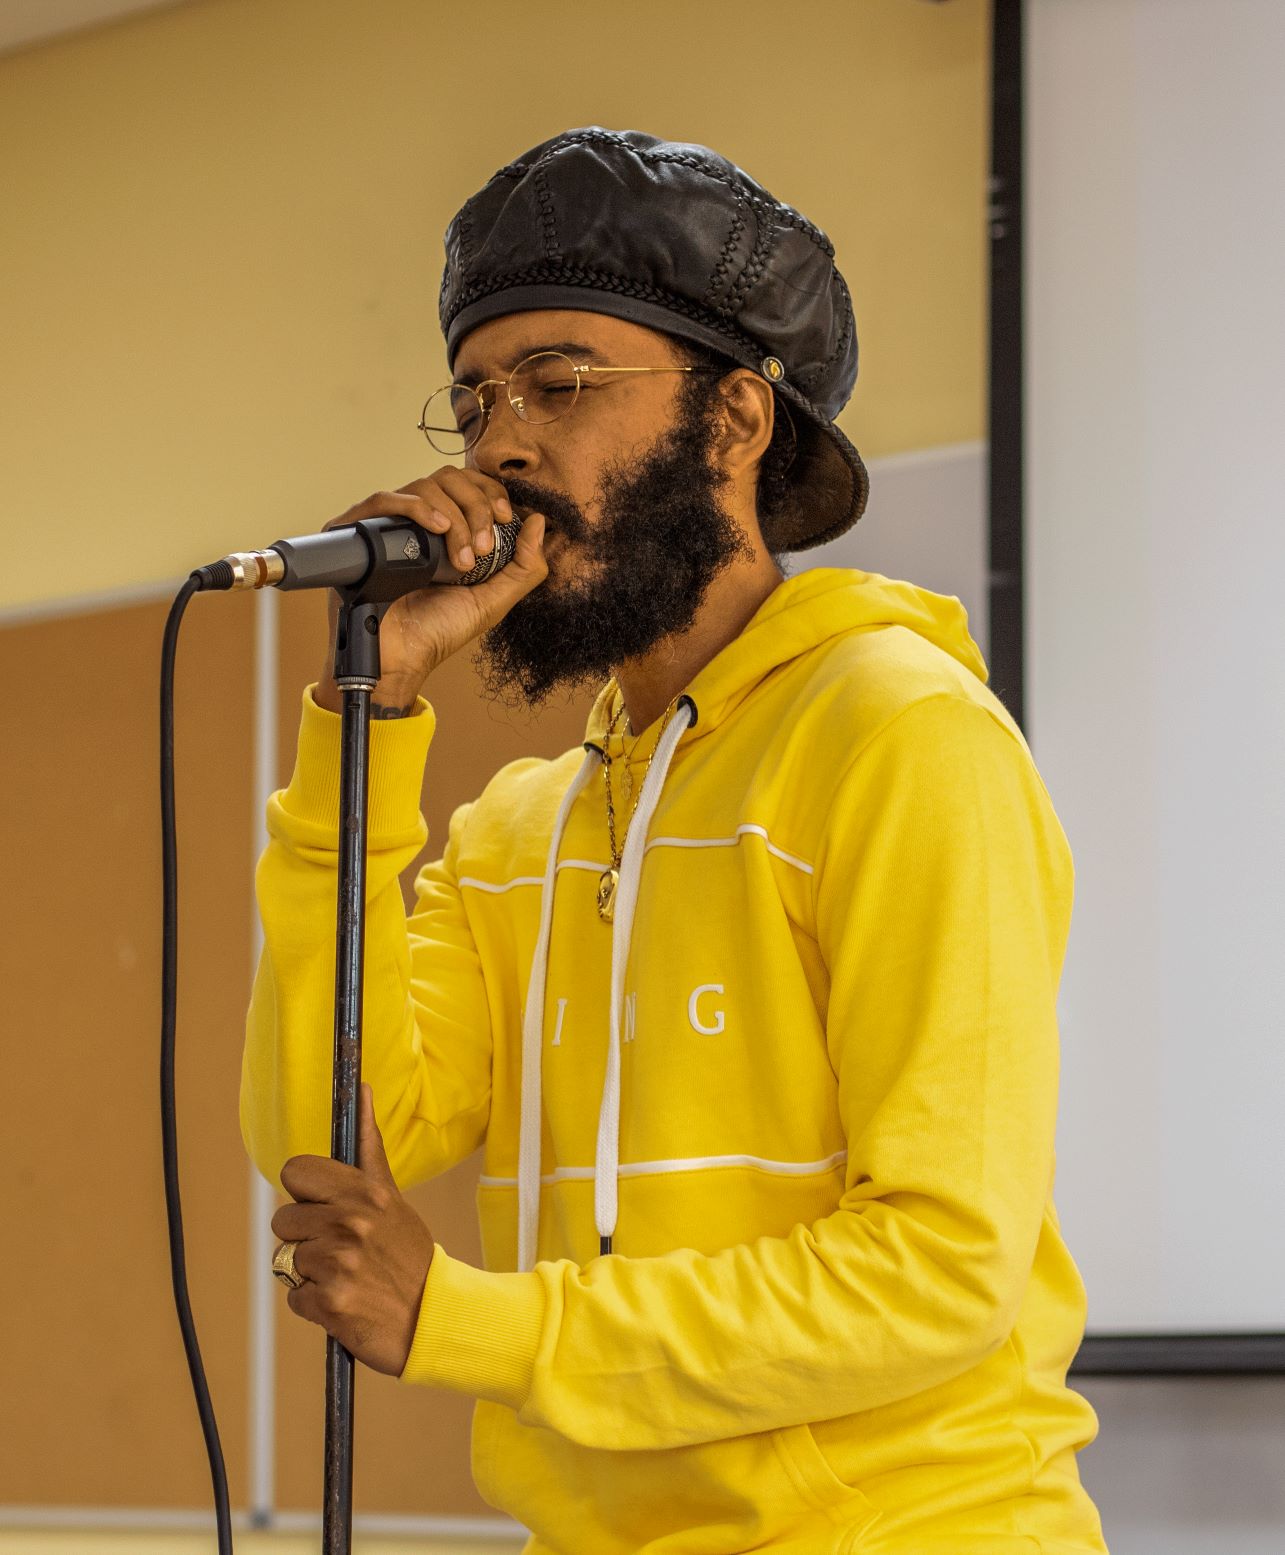 Grammy nominated Reggae artiste Protoje engages members of the Future Marketing Association at a recent seminar held at the Papine campus of the University of Technology, Jamaica campus on January 17, 2019. Photo by Tatyana Atkinson/UJS News